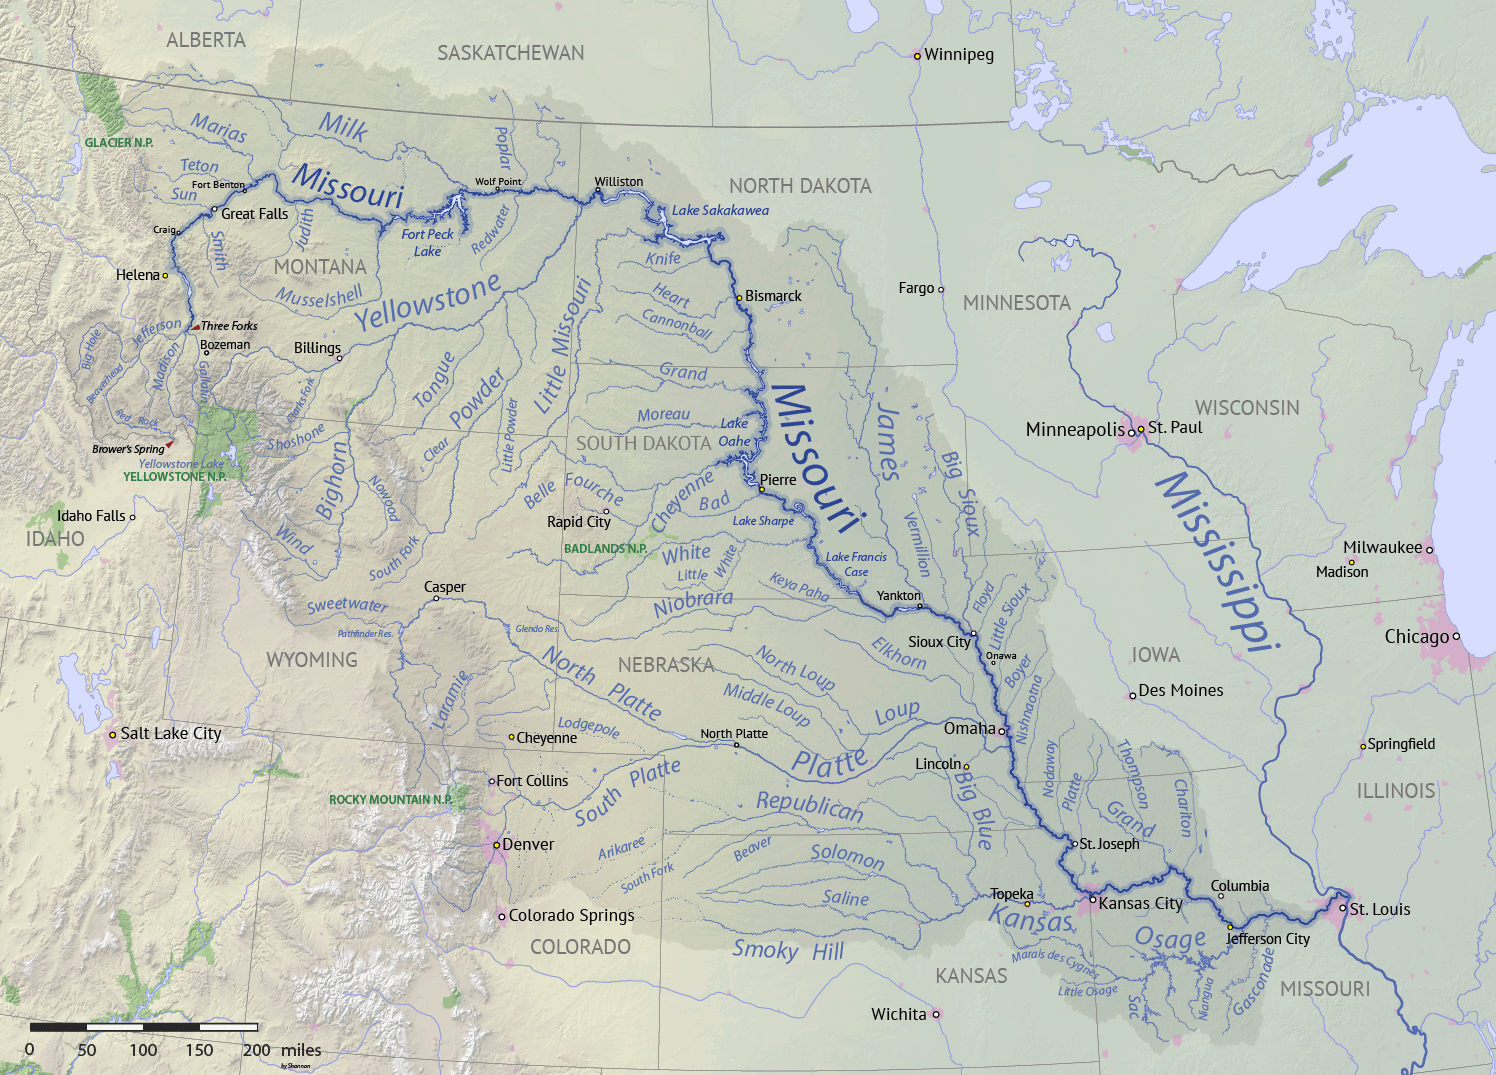 Map showing the Missouri River watershed in the northwest central United States.